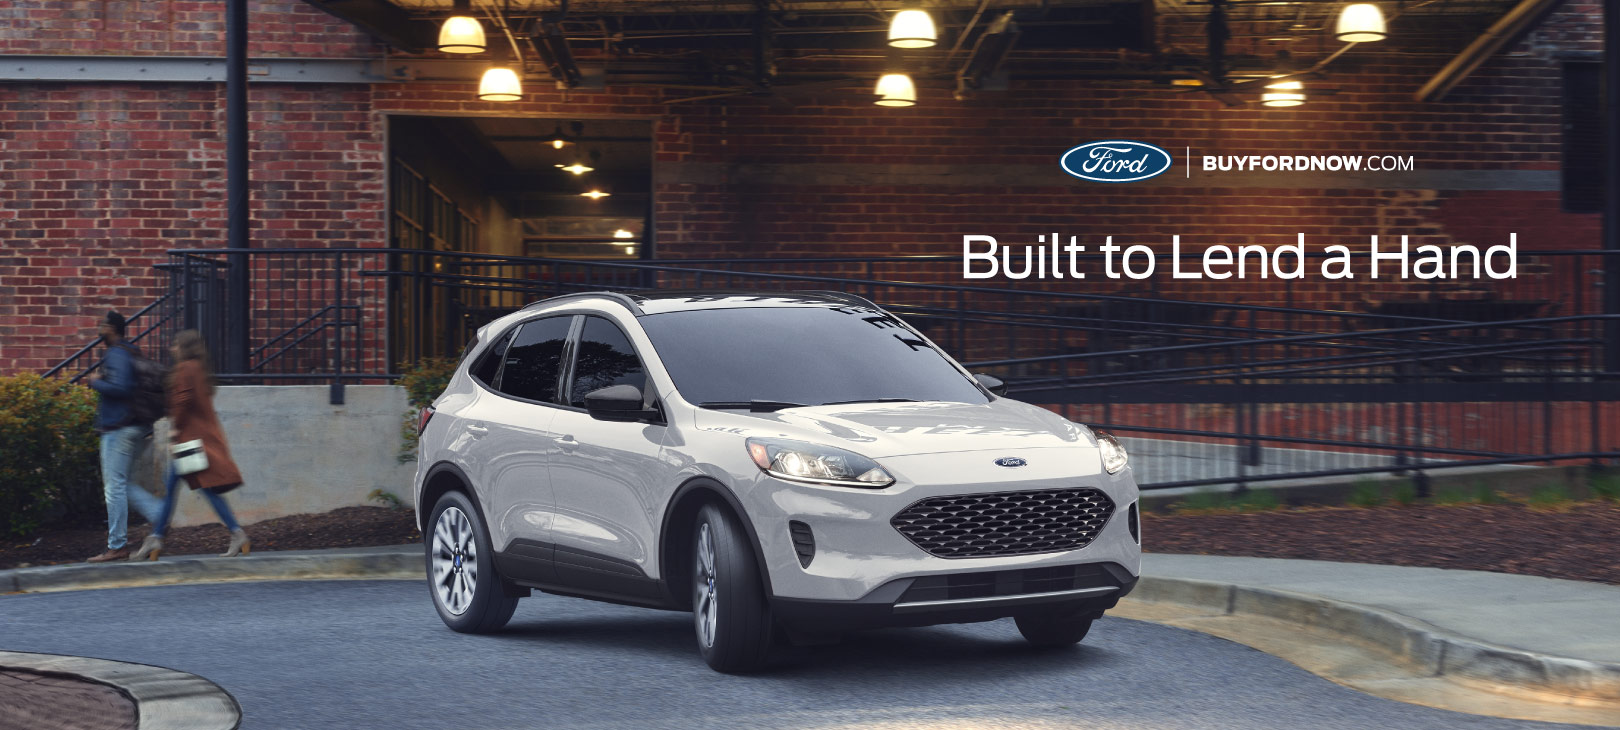 Ford Motor Company is Built to Lend a Hand